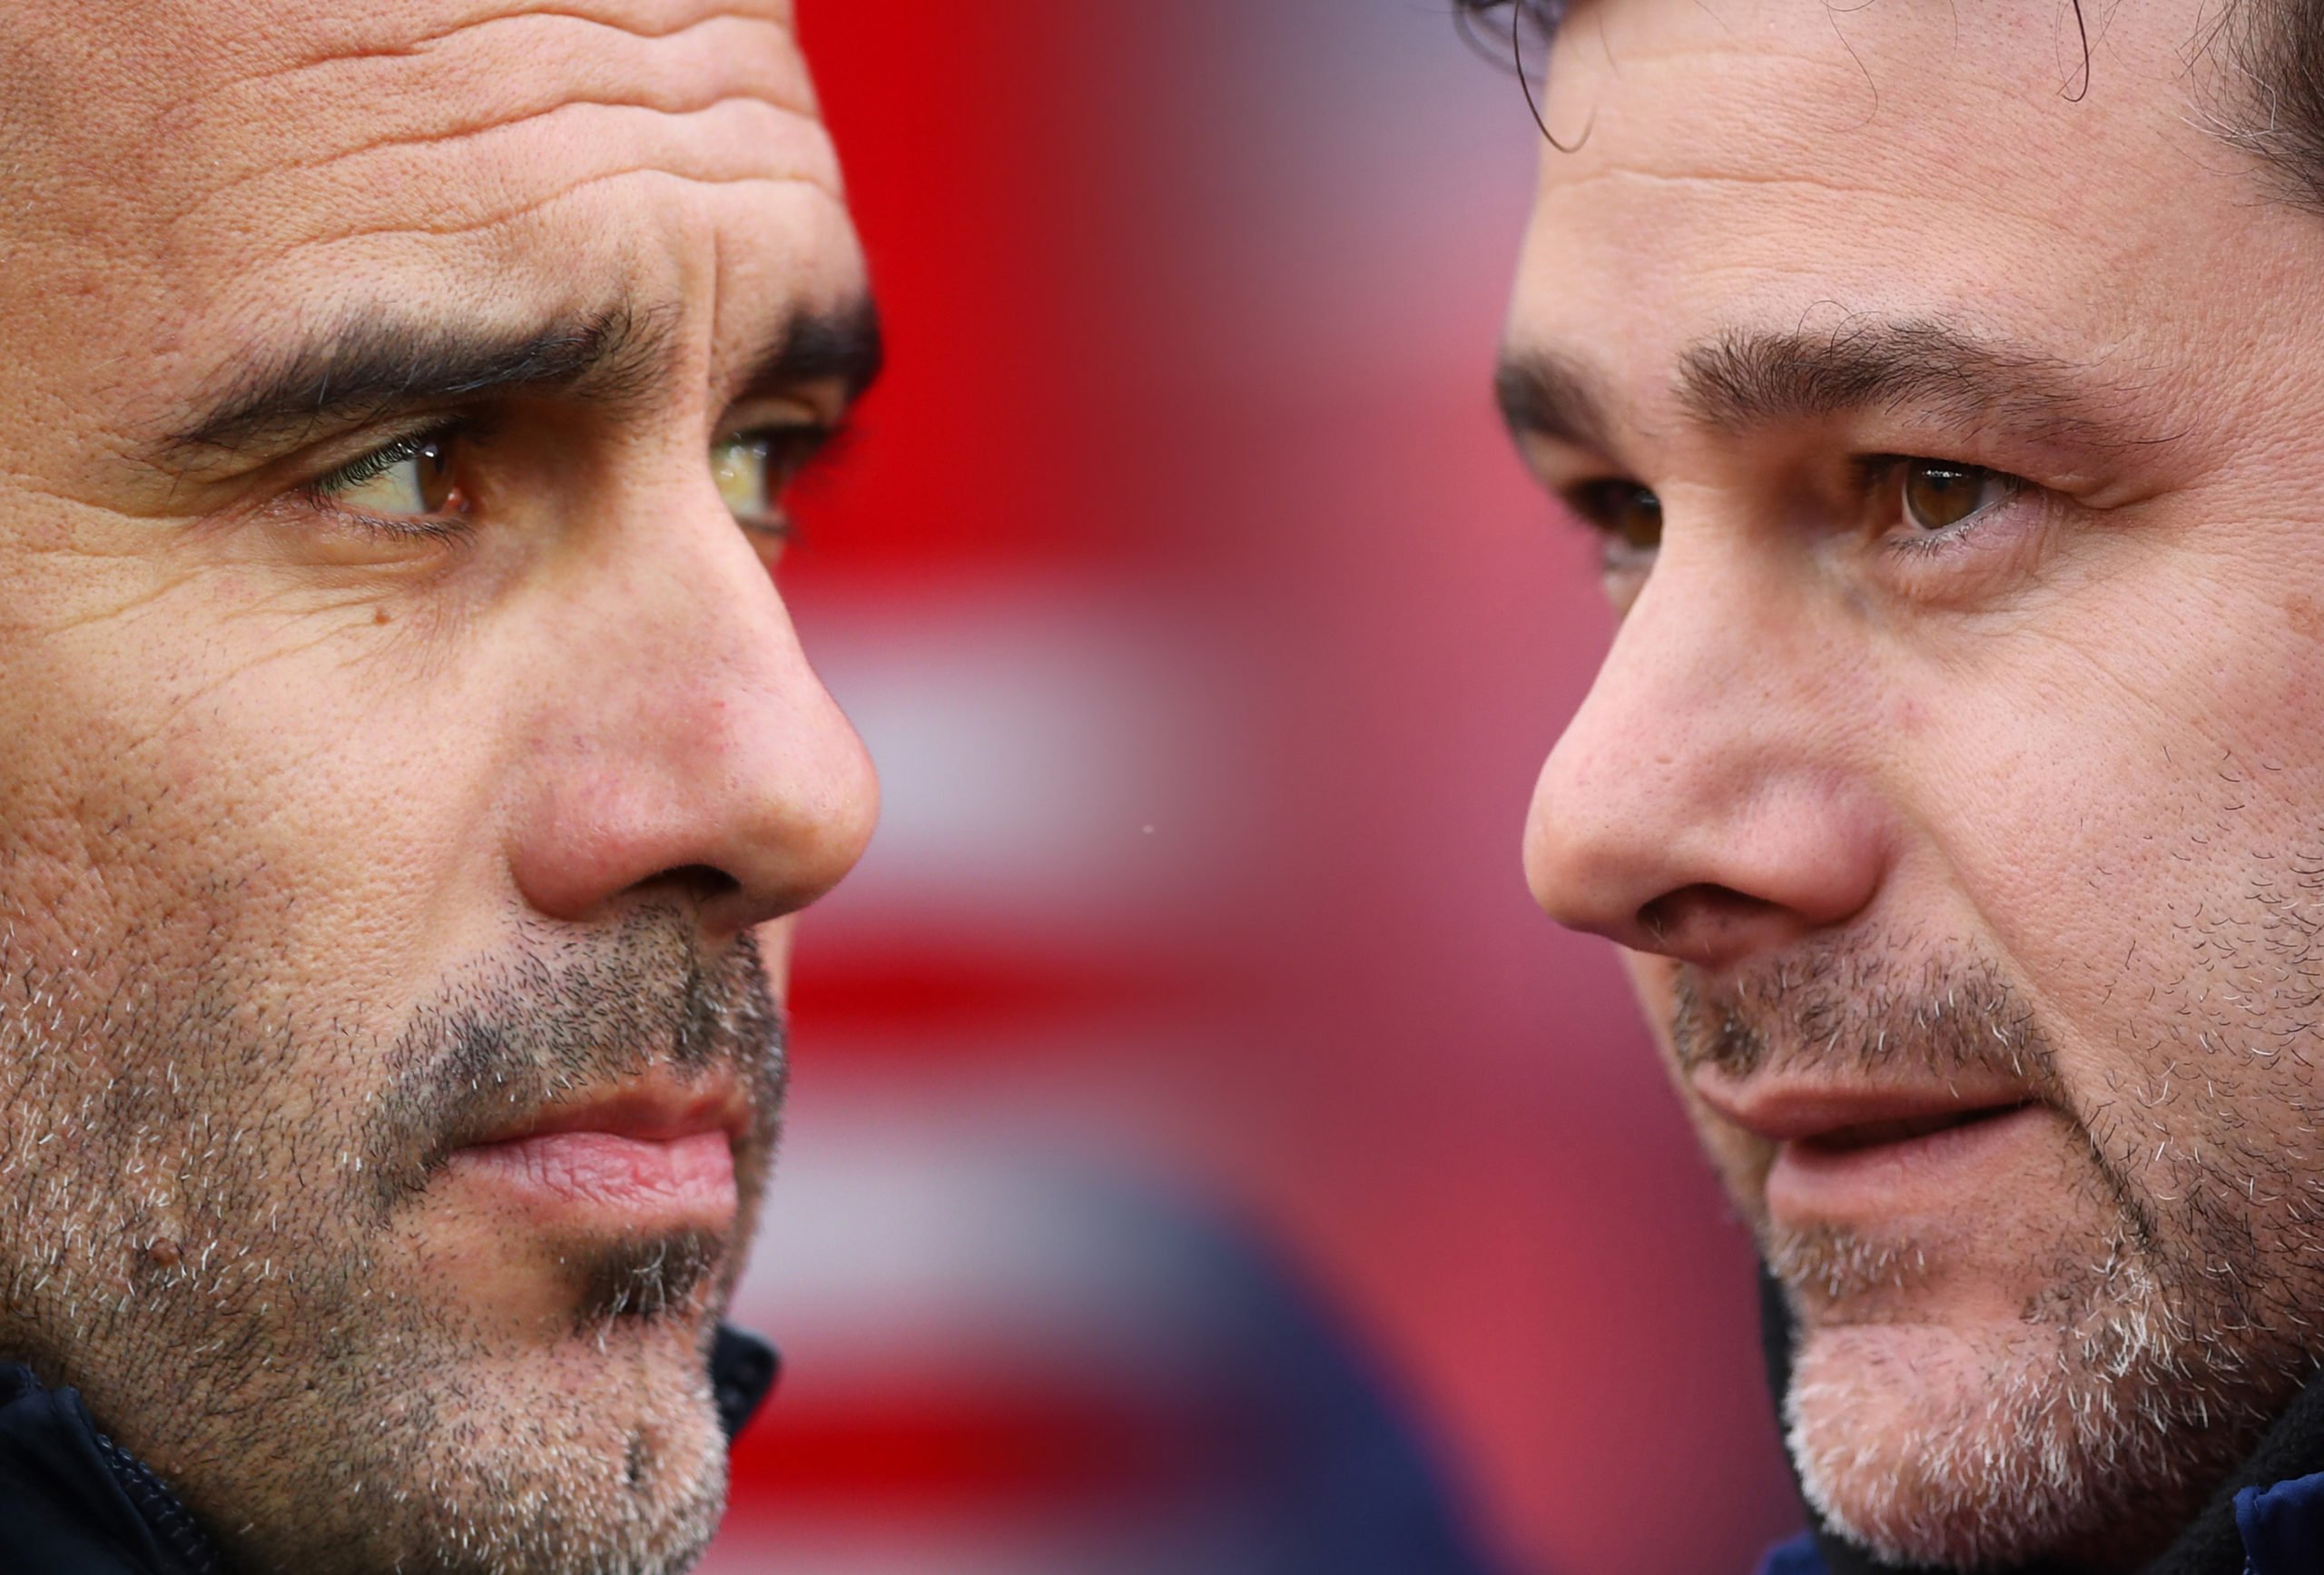 FILE PHOTO (EDITORS NOTE: COMPOSITE OF IMAGES - Image numbers 1089388290,942986596 - GRADIENT ADDED) In this composite image a comparison has been made between Pep Guardiola, (L) manager of Manchester City and Mauricio Pochettino, Manager of Tottenham Hotspur .  Manchester City and Tottenham Hotspur meet in a Premier League fixture on August 17, 2019 at the Etihad Stadium in Manchester. ***LEFT IMAGE*** SOUTHAMPTON, ENGLAND - DECEMBER 30: Pep Guardiola, manager of Manchester City looks on before the Premier League match between Southampton FC and Manchester City at St Mary's Stadium on December 30, 2018 in Southampton, United Kingdom. (Photo by Dan Istitene/Getty Images) ***RIGHT IMAGE*** STOKE ON TRENT, ENGLAND - APRIL 07: Mauricio Pochettino, Manager of Tottenham Hotspur looks on prior to the Premier League match between Stoke City and Tottenham Hotspur at Bet365 Stadium on April 7, 2018 in Stoke on Trent, England. (Photo by Gareth Copley/Getty Images)
The 4th Official uses images provided by the following image agency:
Getty Images (https://www.gettyimages.de/)
Imago Images (https://www.imago-images.de/)